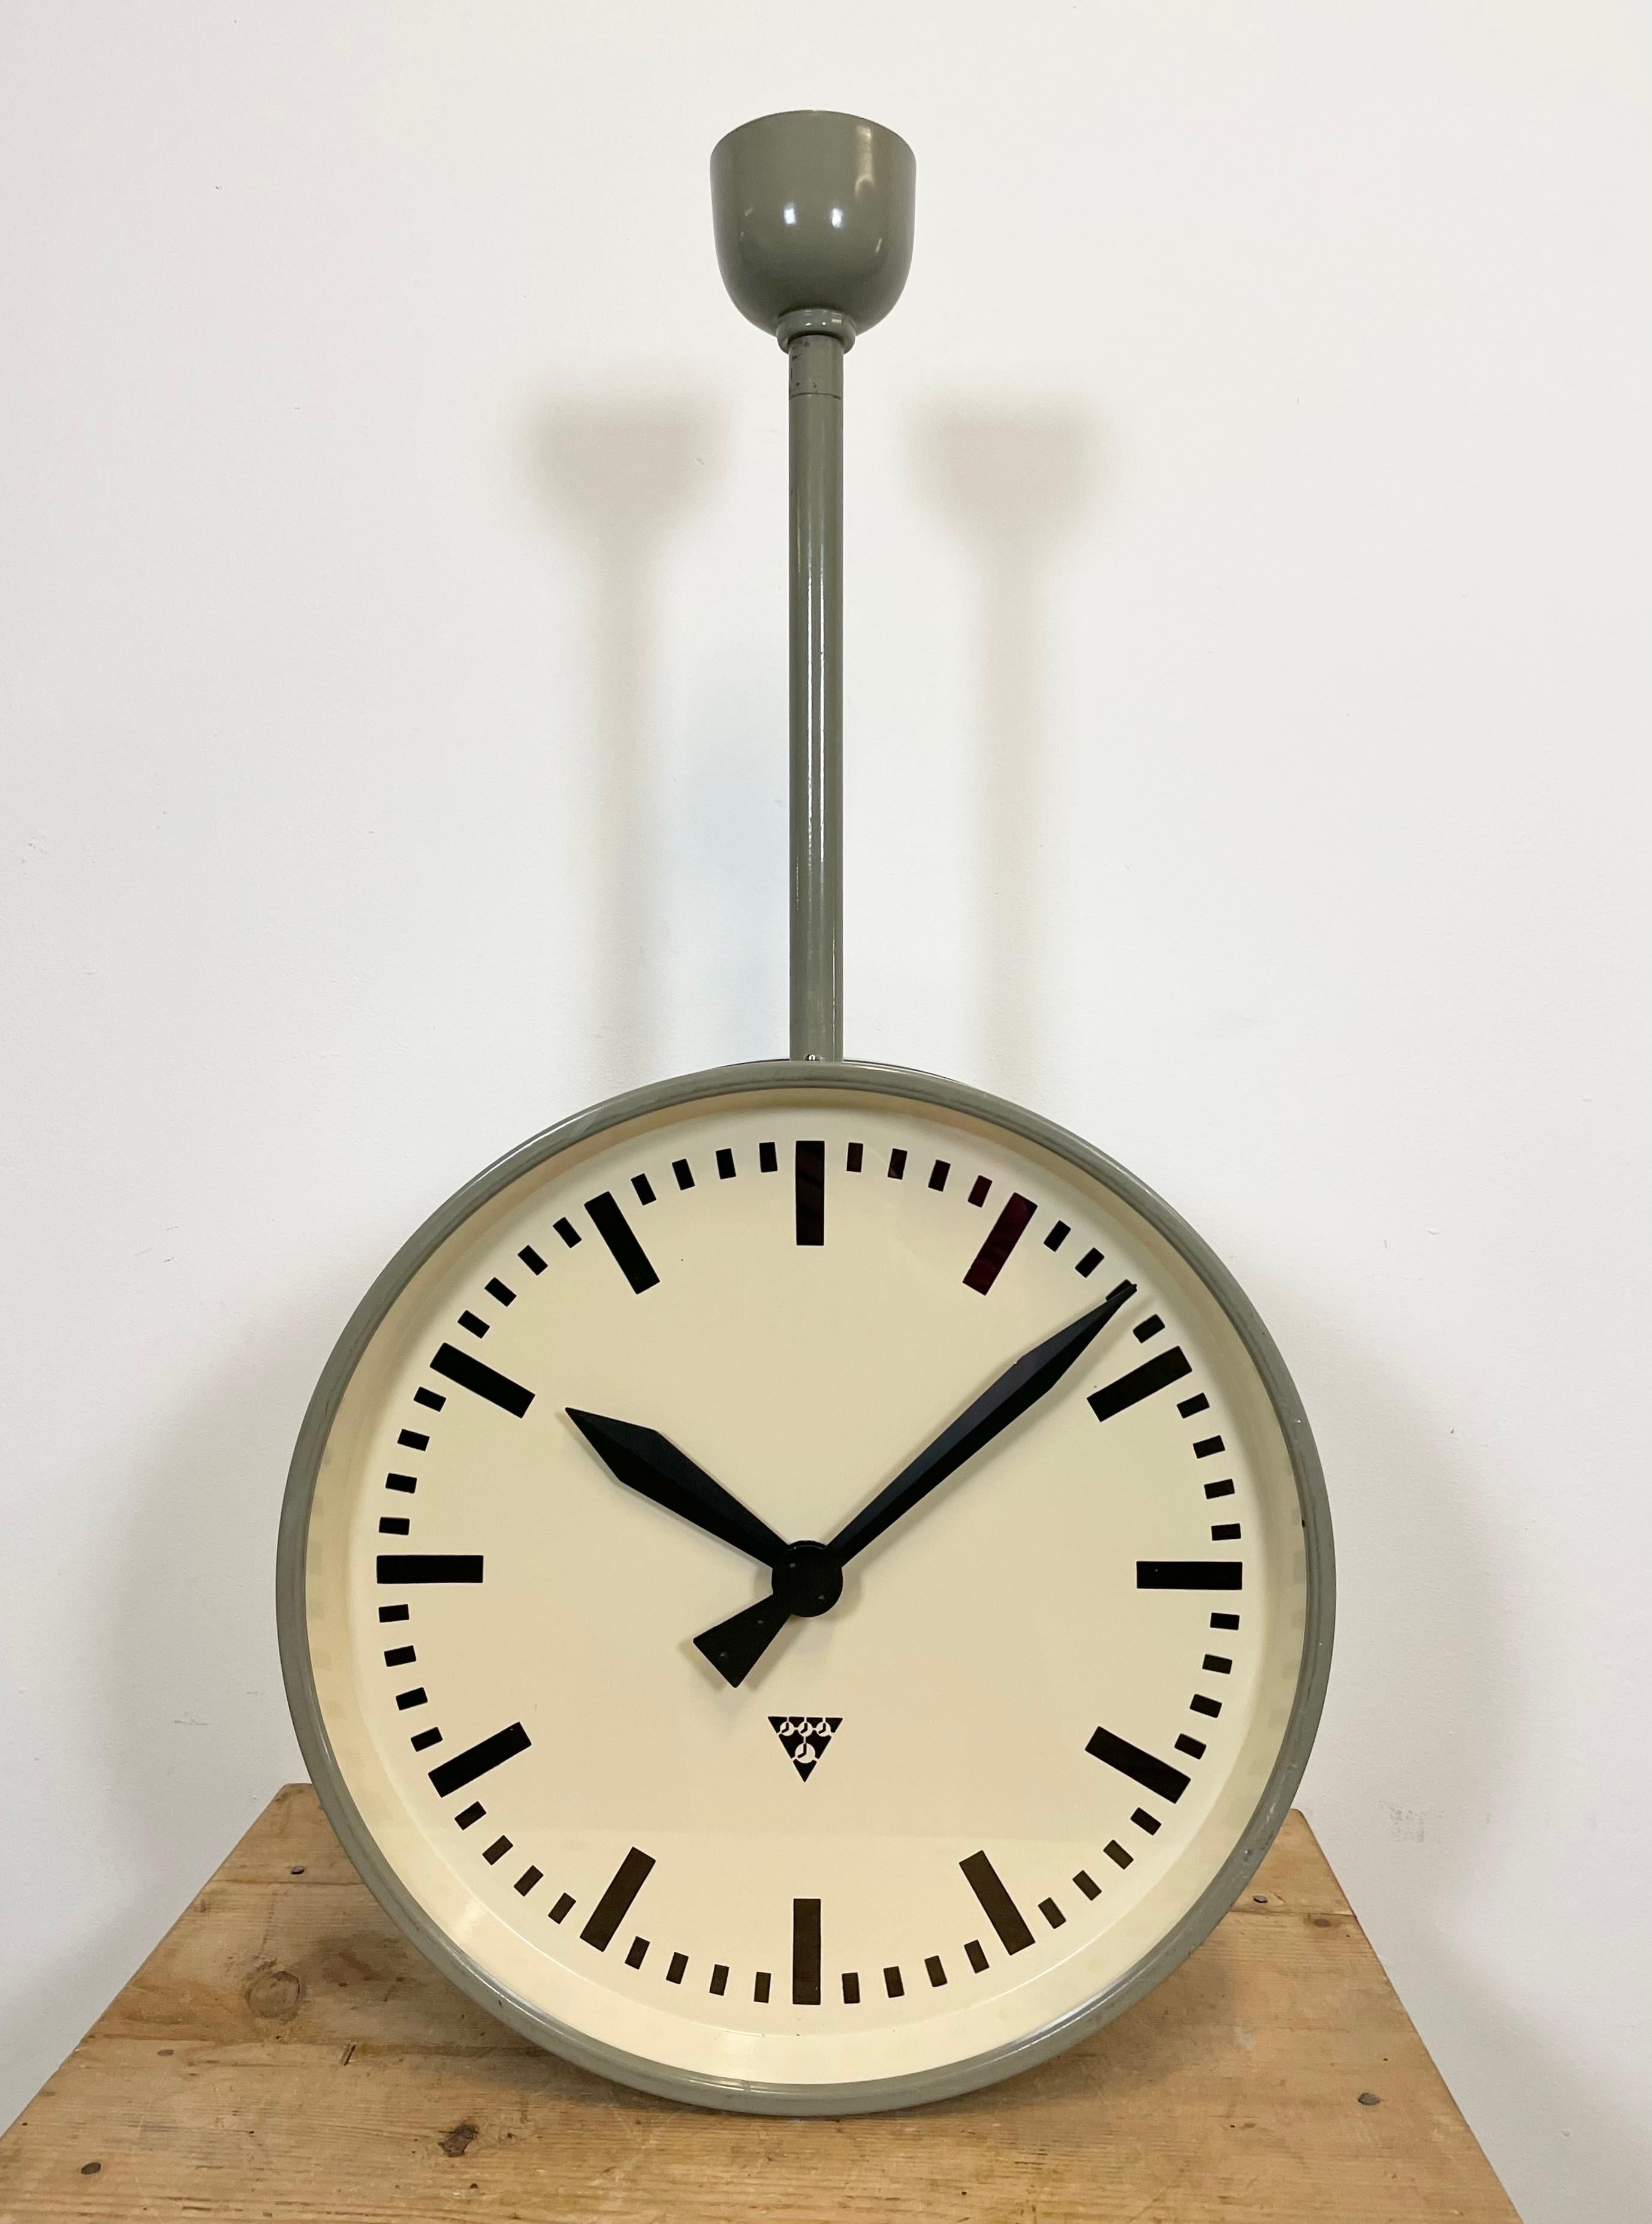 This large double-sided railway or factory clock was produced by Pragotron, in former Czechoslovakia, during the 1950s. The piece features a grey metal body and a clear glass cover. The clock has been converted into a battery-powered clockwork and